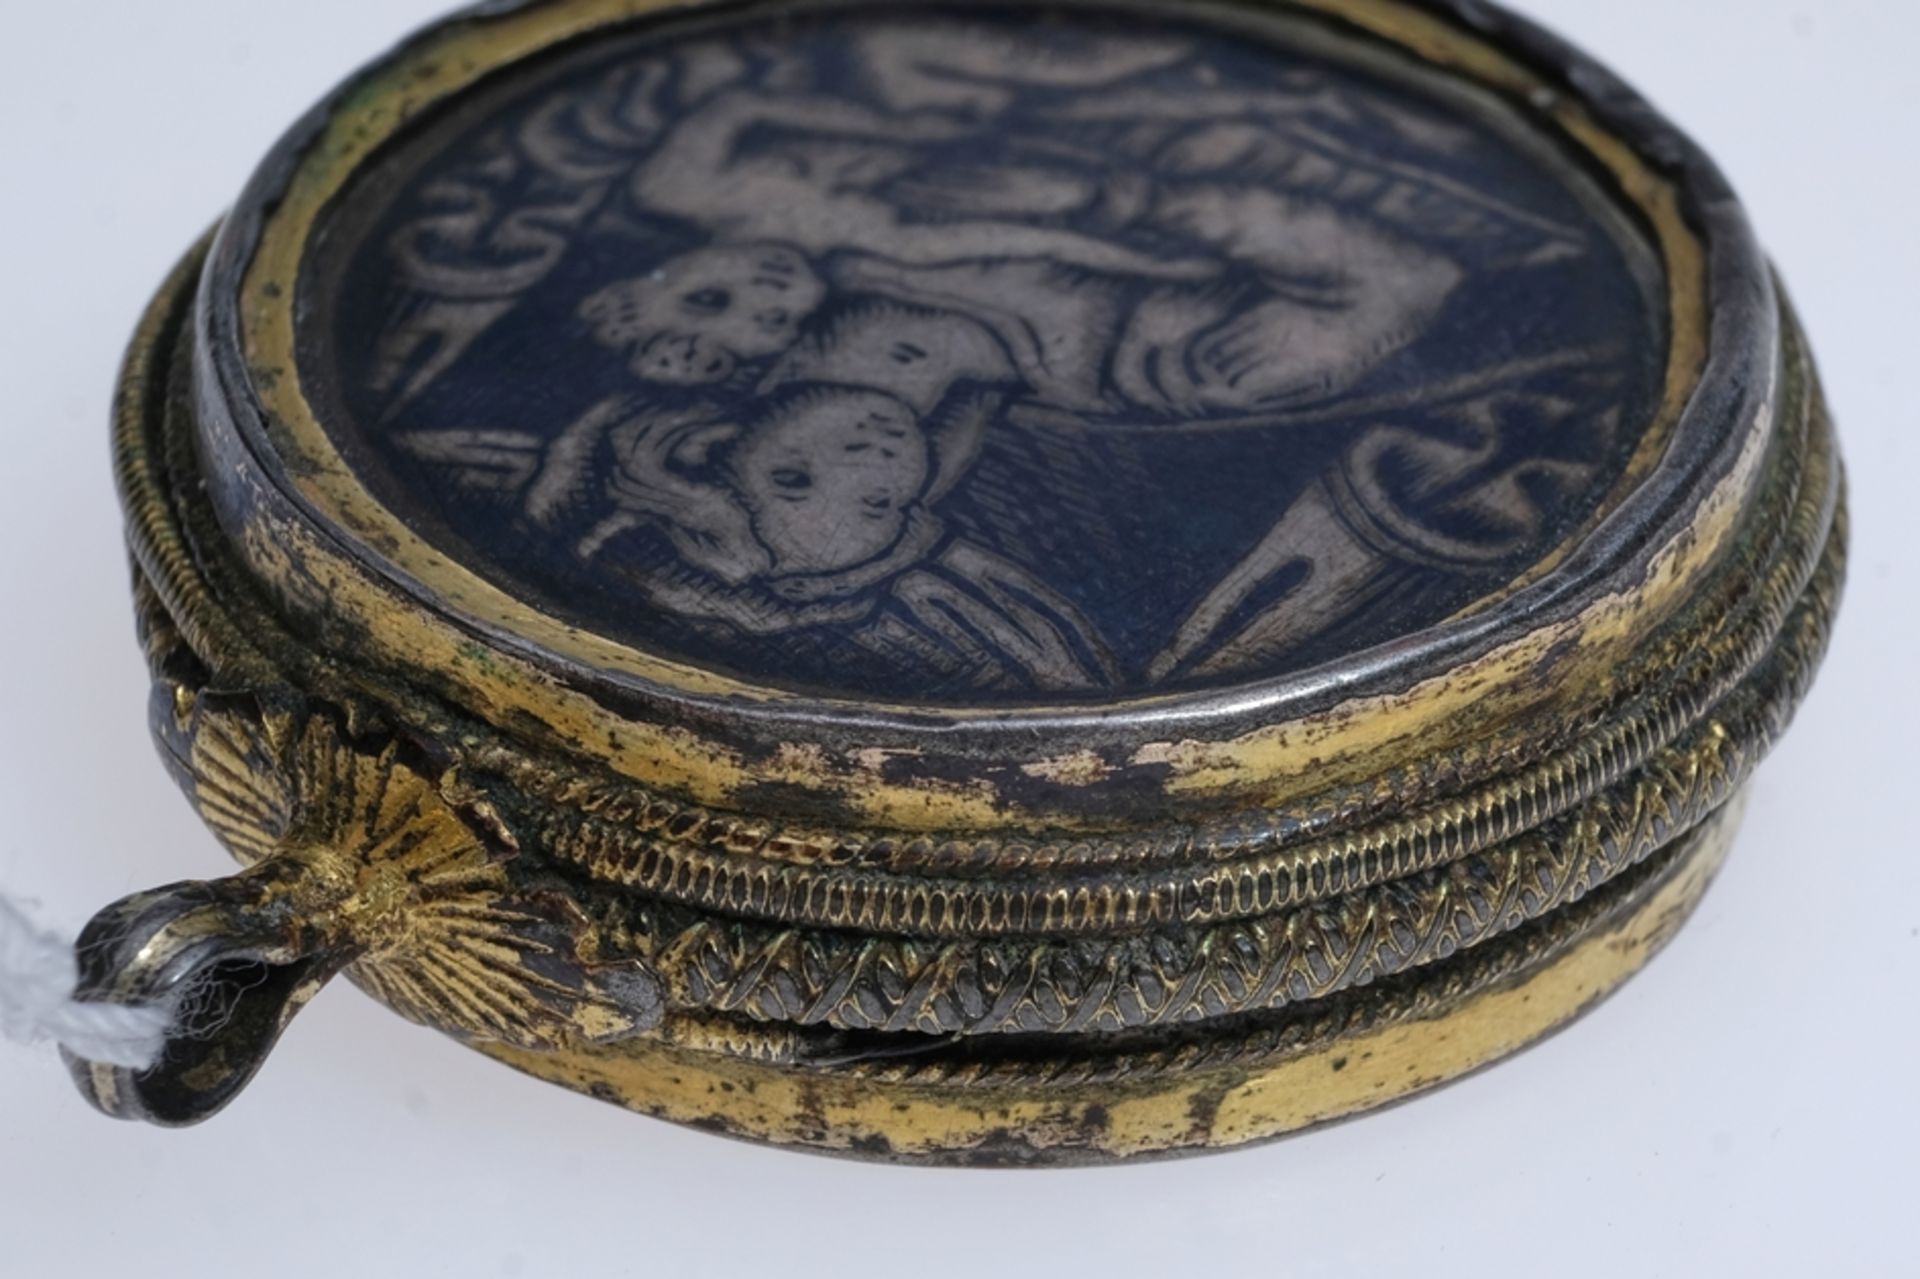 Gothic medallion, around 1500, possibly Upper Italy, wax-like texture, front depicts mother and chi - Image 3 of 3